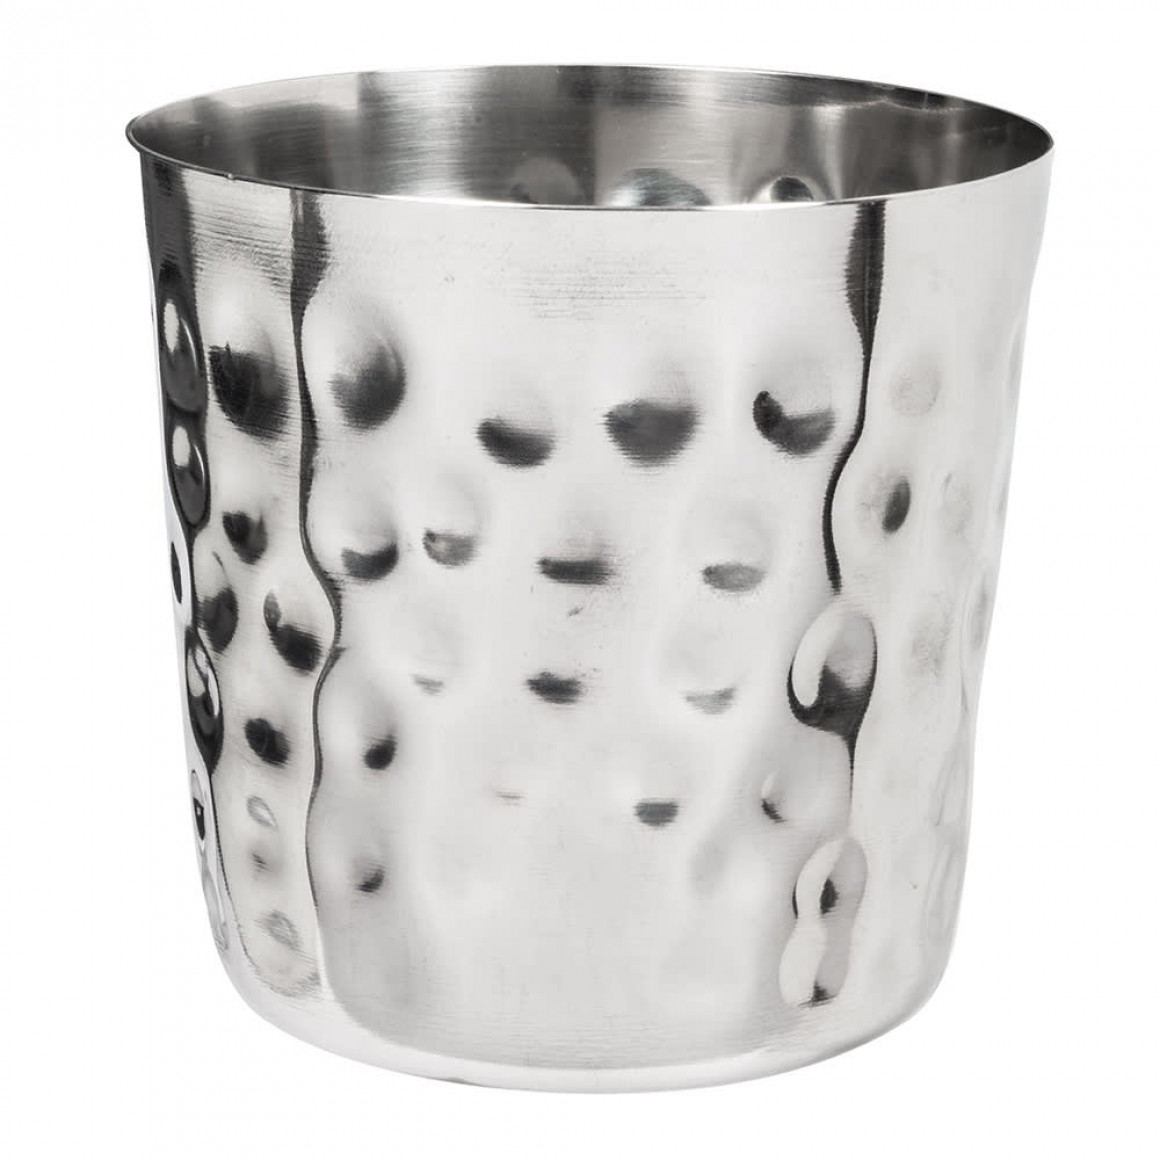 STAINLESS STEEL FRY CUP, HAMMERED, STRAIGHT-SIDED, 14 OZ.